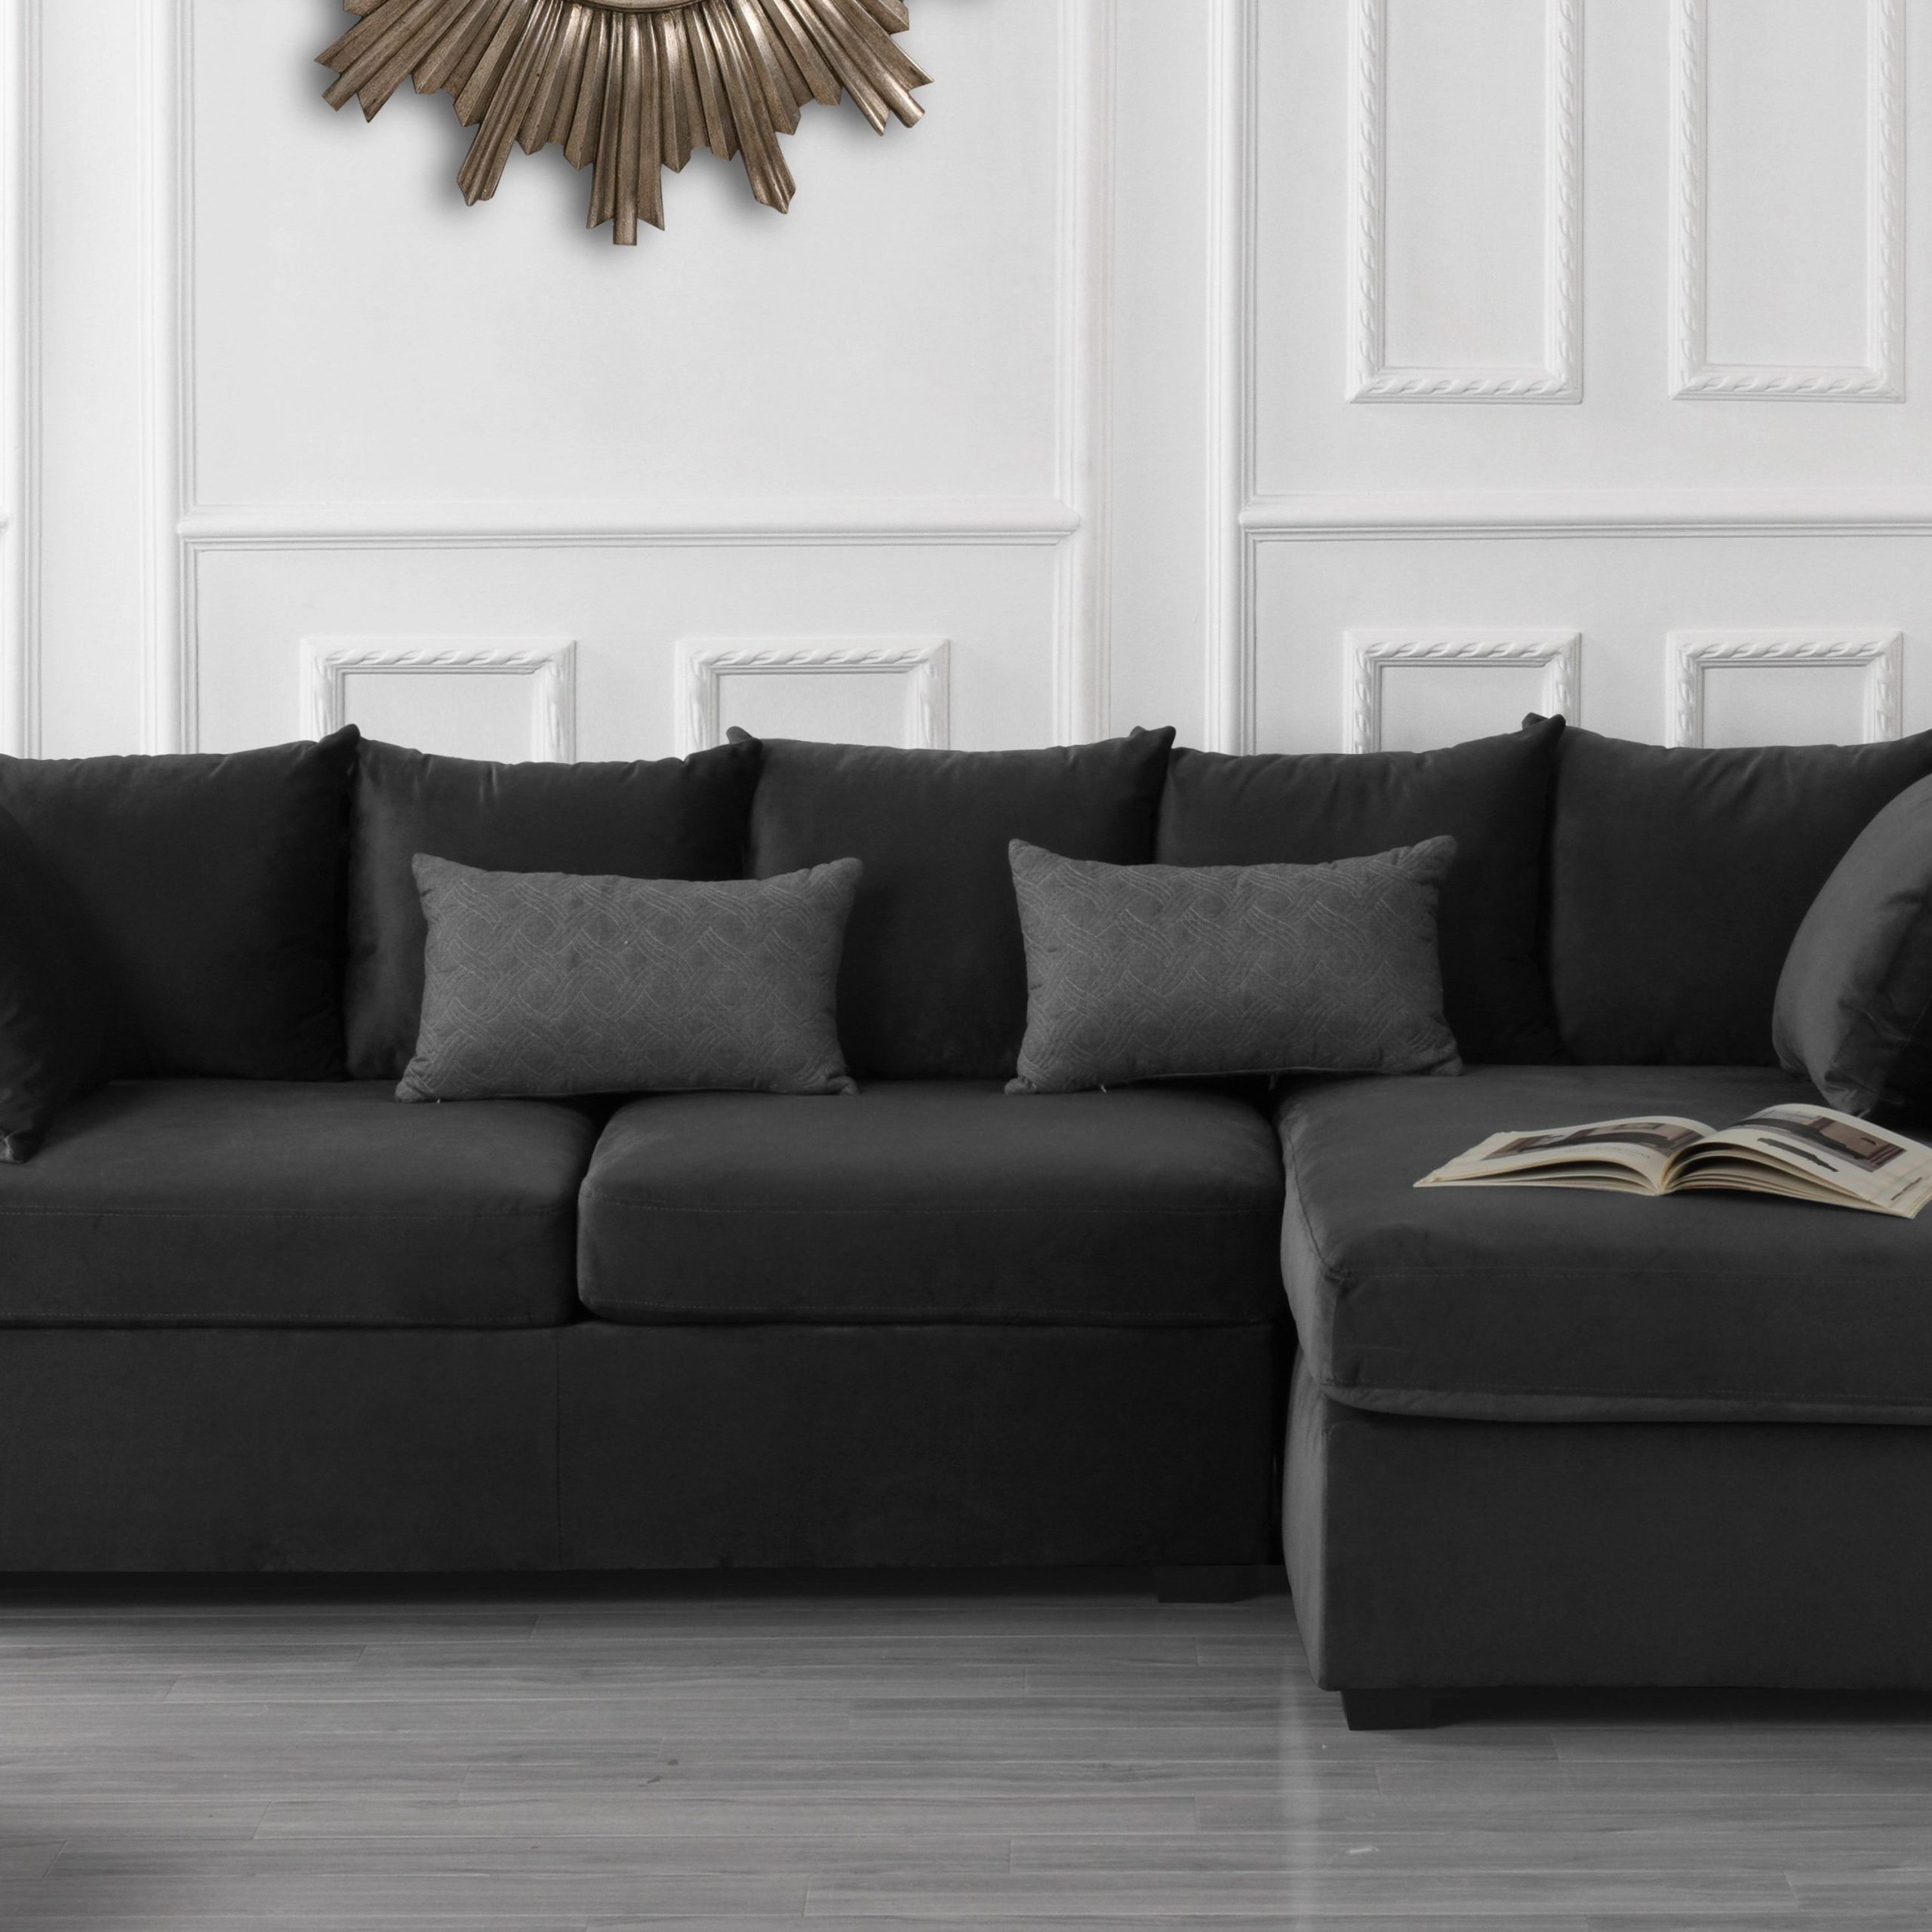 30+ Large L Shape Couch Intended For 3 Seat L Shaped Sofas In Black (Gallery 17 of 20)